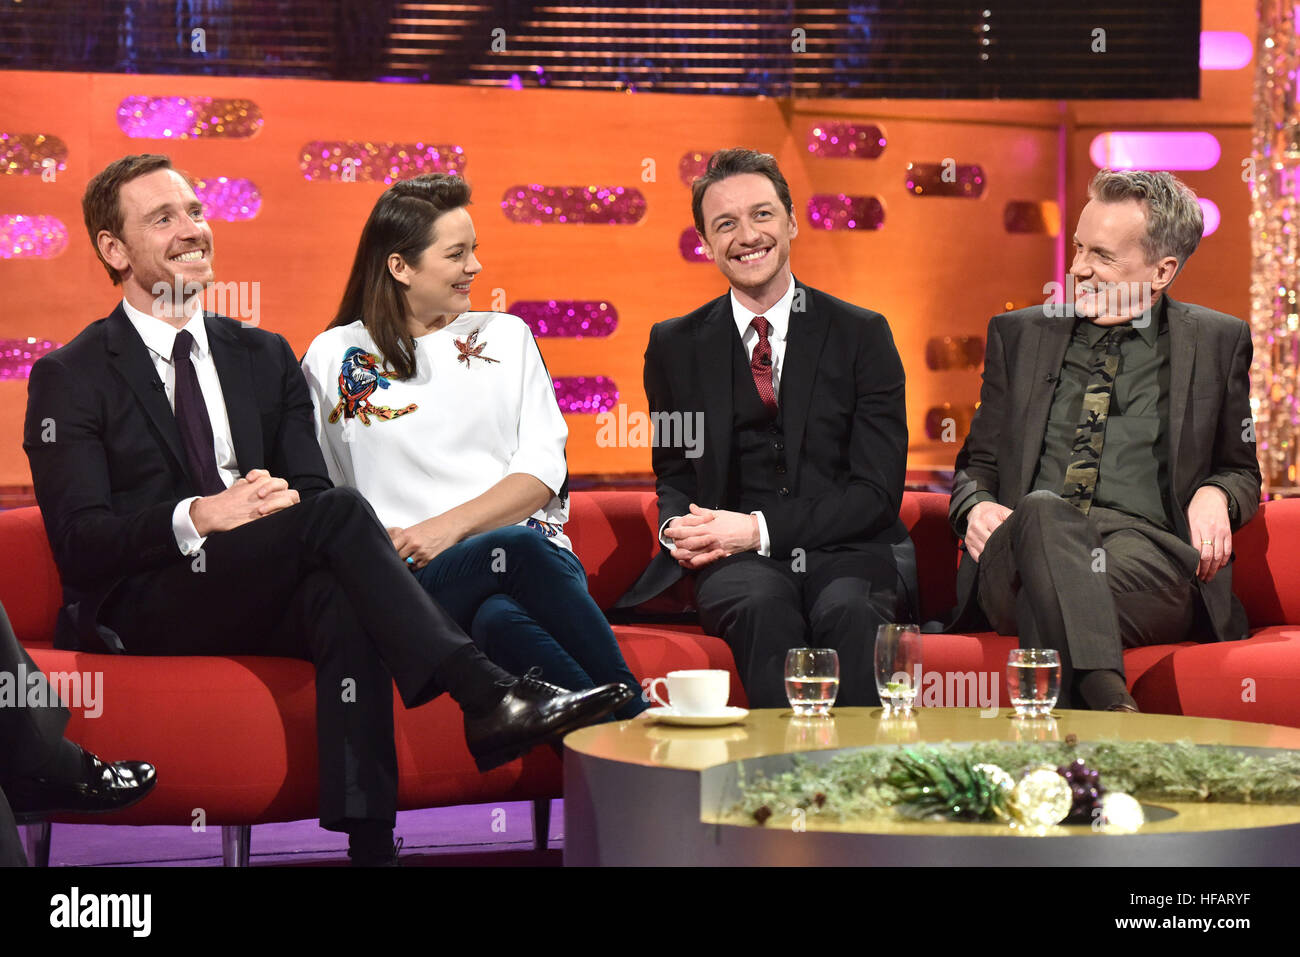 (left to right) Michael Fassbender, Marion Cotillard, James McAvoy and Frank Skinner during filming of the Graham Norton Show at The London Studios, south London, to be aired on BBC One on New Year's Eve. Stock Photo